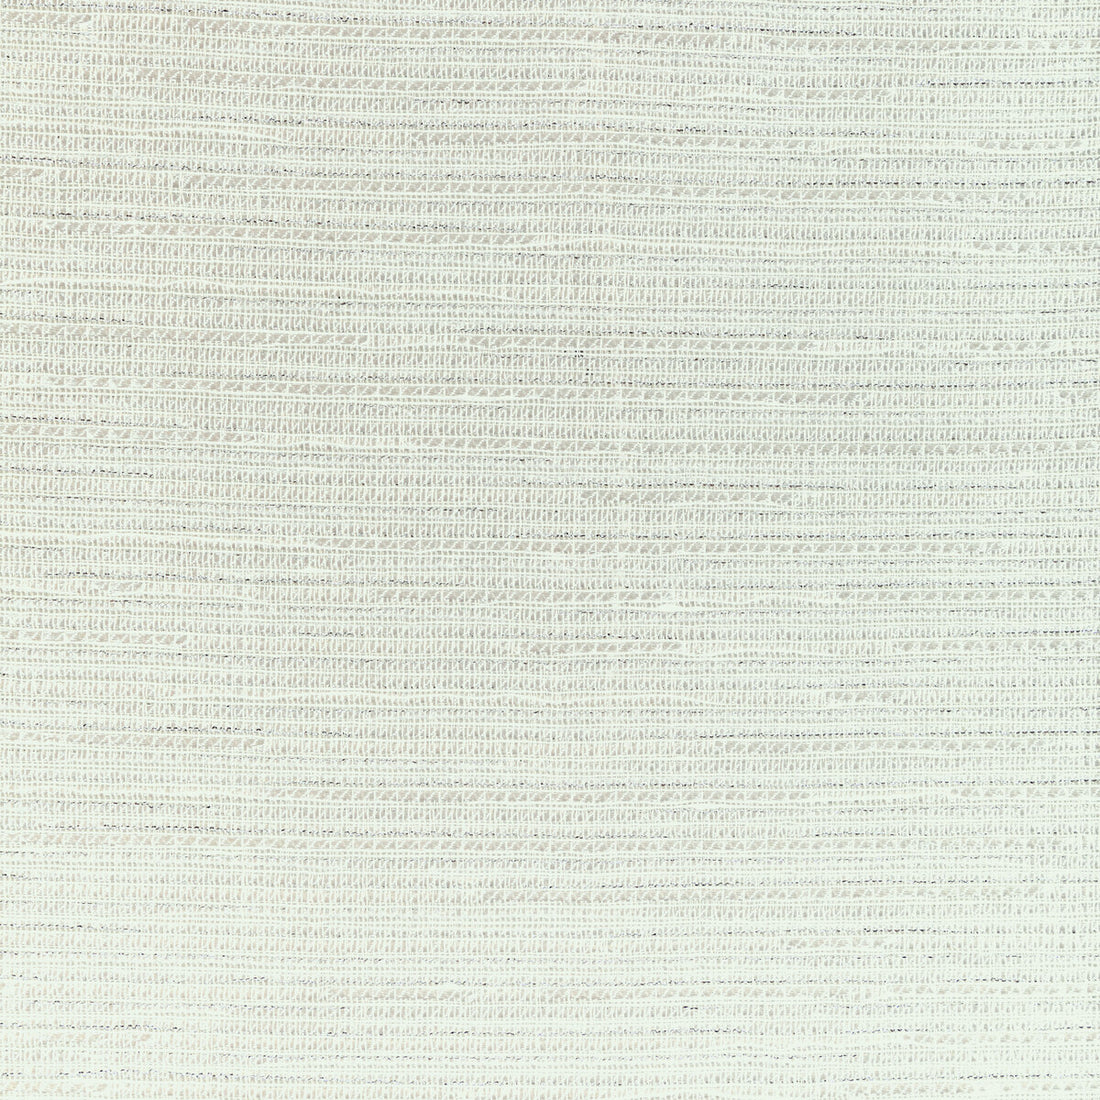 Shimmer Way fabric in platinum color - pattern 4888.1.0 - by Kravet Couture in the Modern Luxe III collection